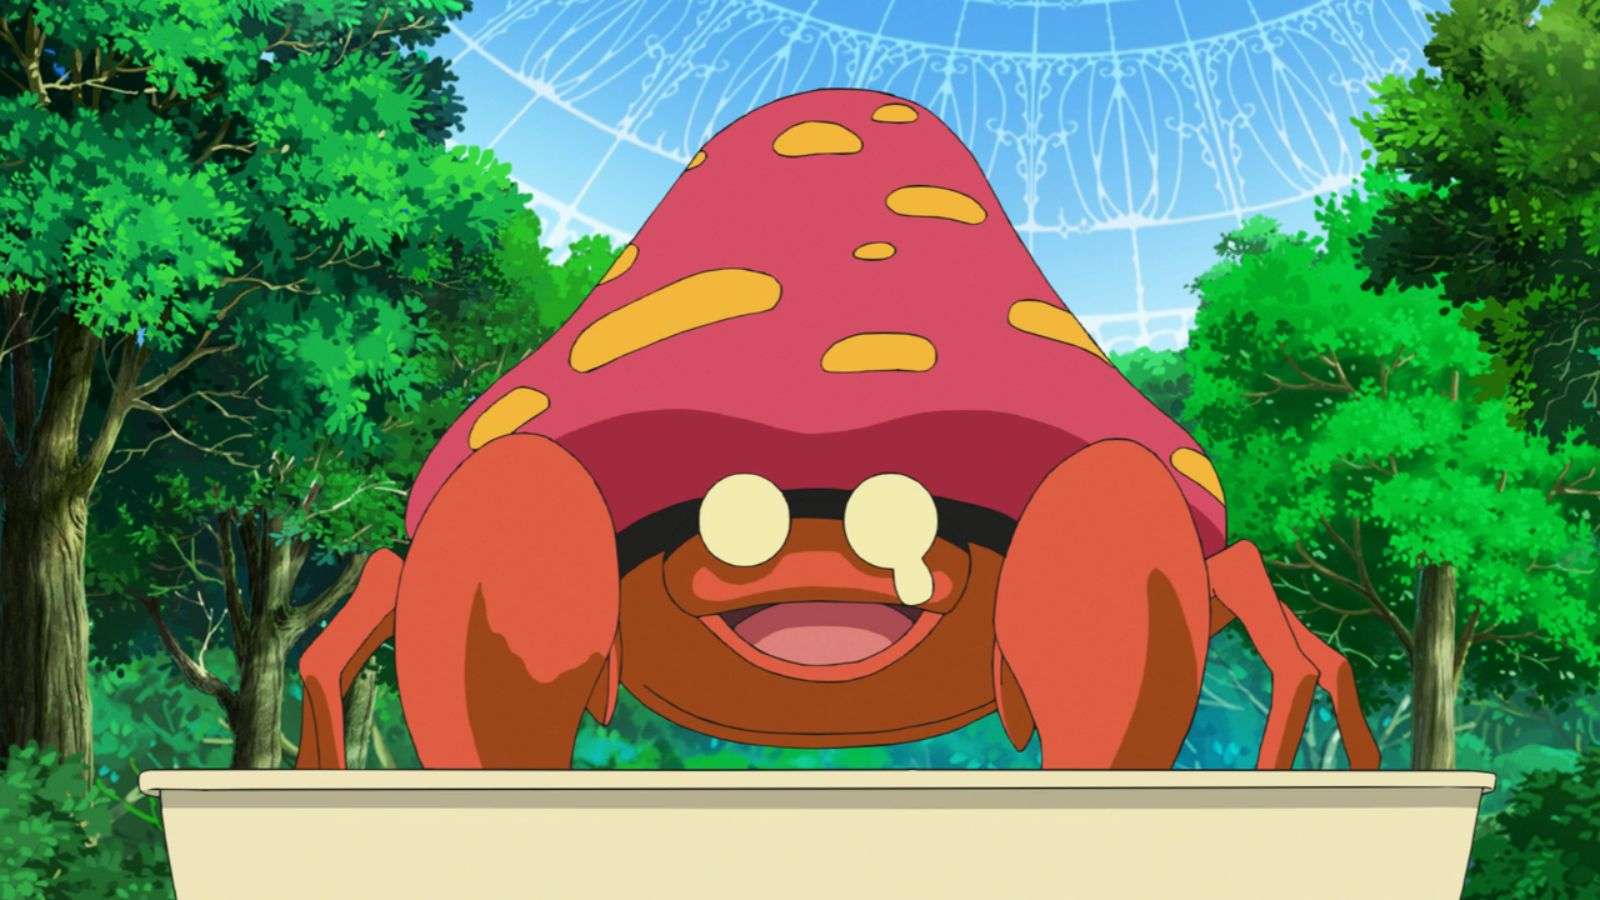 Parasect from Pokemon anime.